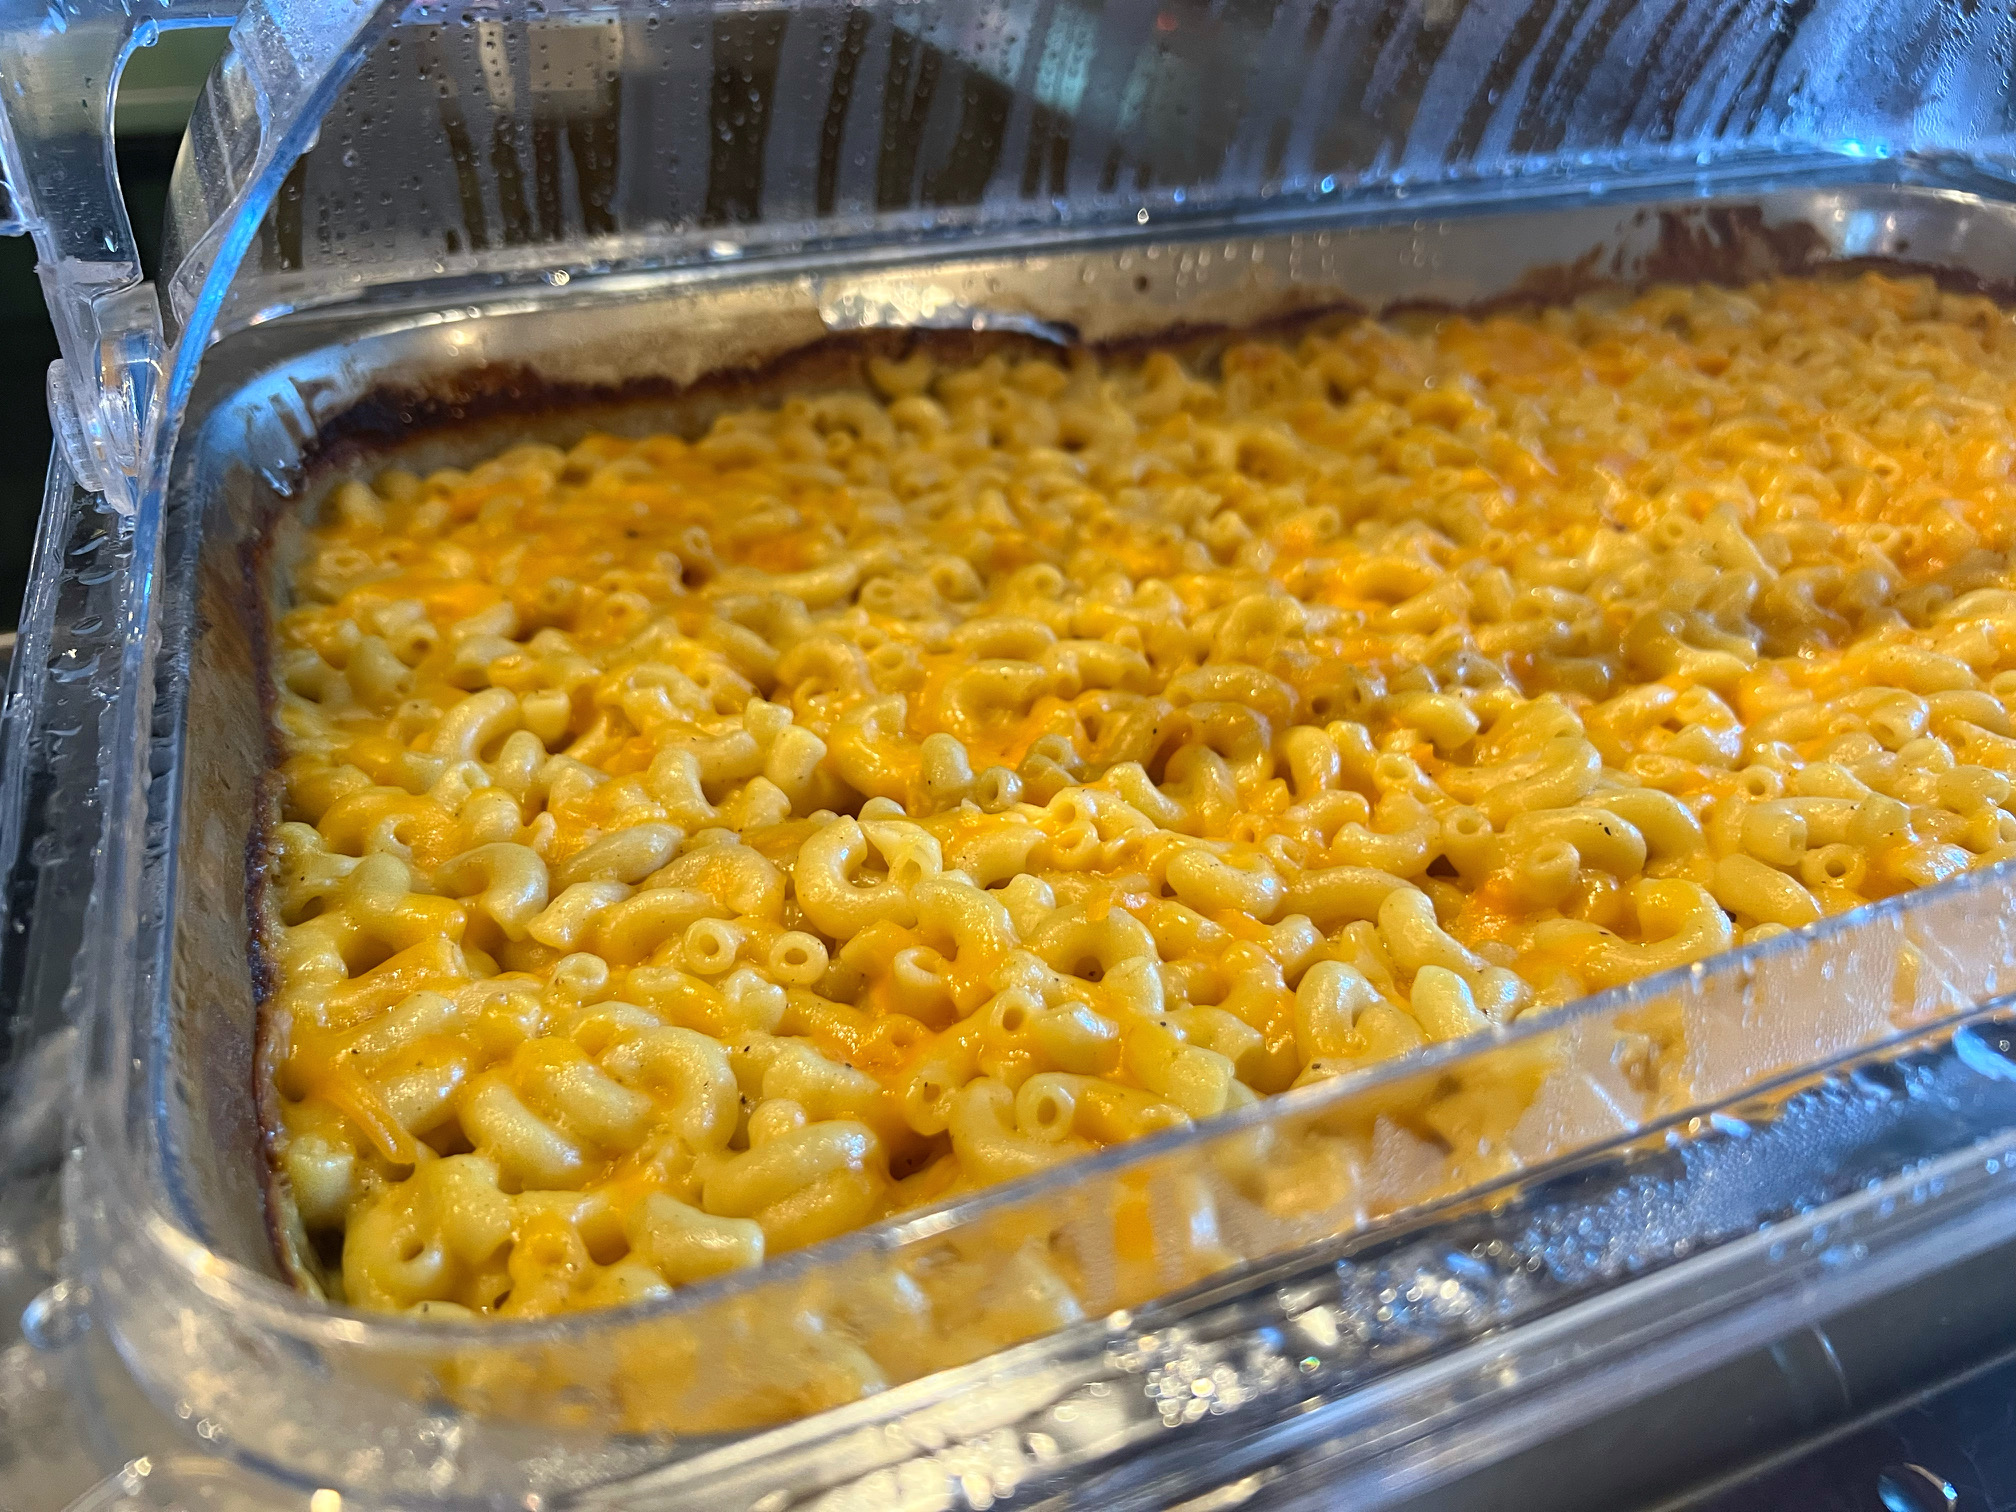 In a giant metal pan, there is a large tray of macaroni and cheese. Photo by Alyssa Buckley.